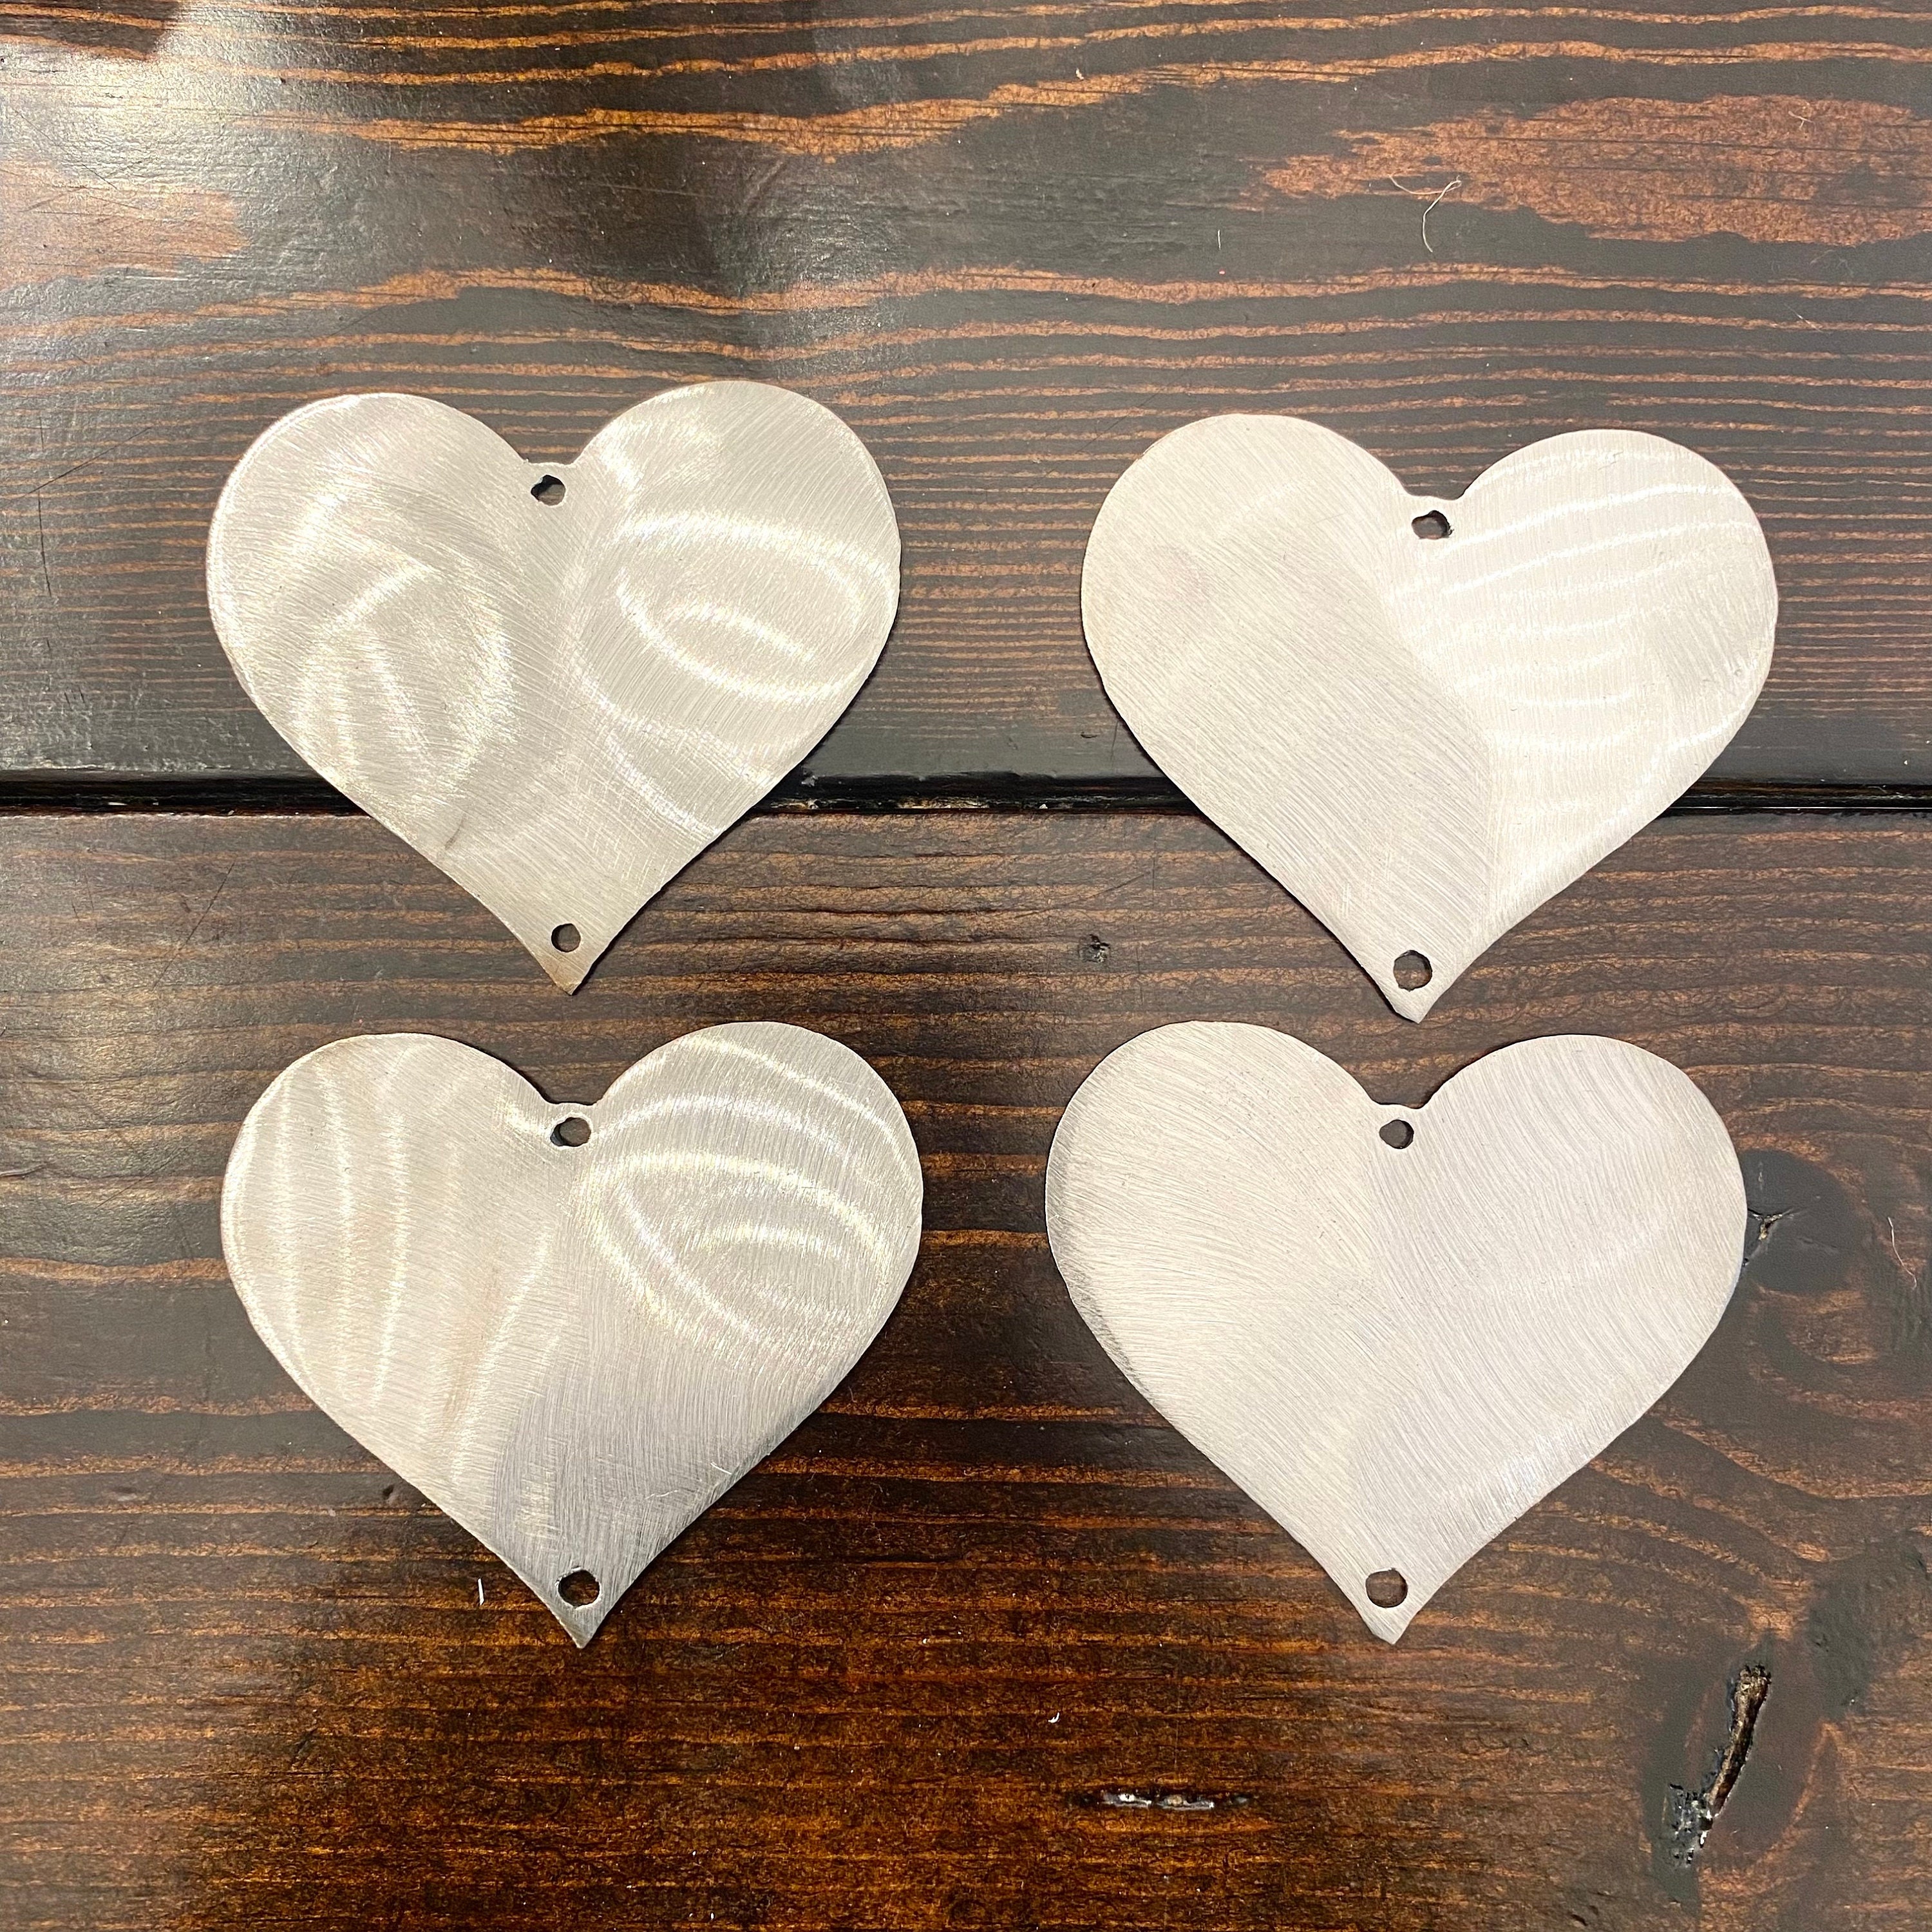 Wood Hearts Hole. Unfinished 4 Inches With a Heart Hole Set of 10, Wood  Heart, Holiday Craft Supplies, Crafts, Kid DIY Shapes, Paintable 